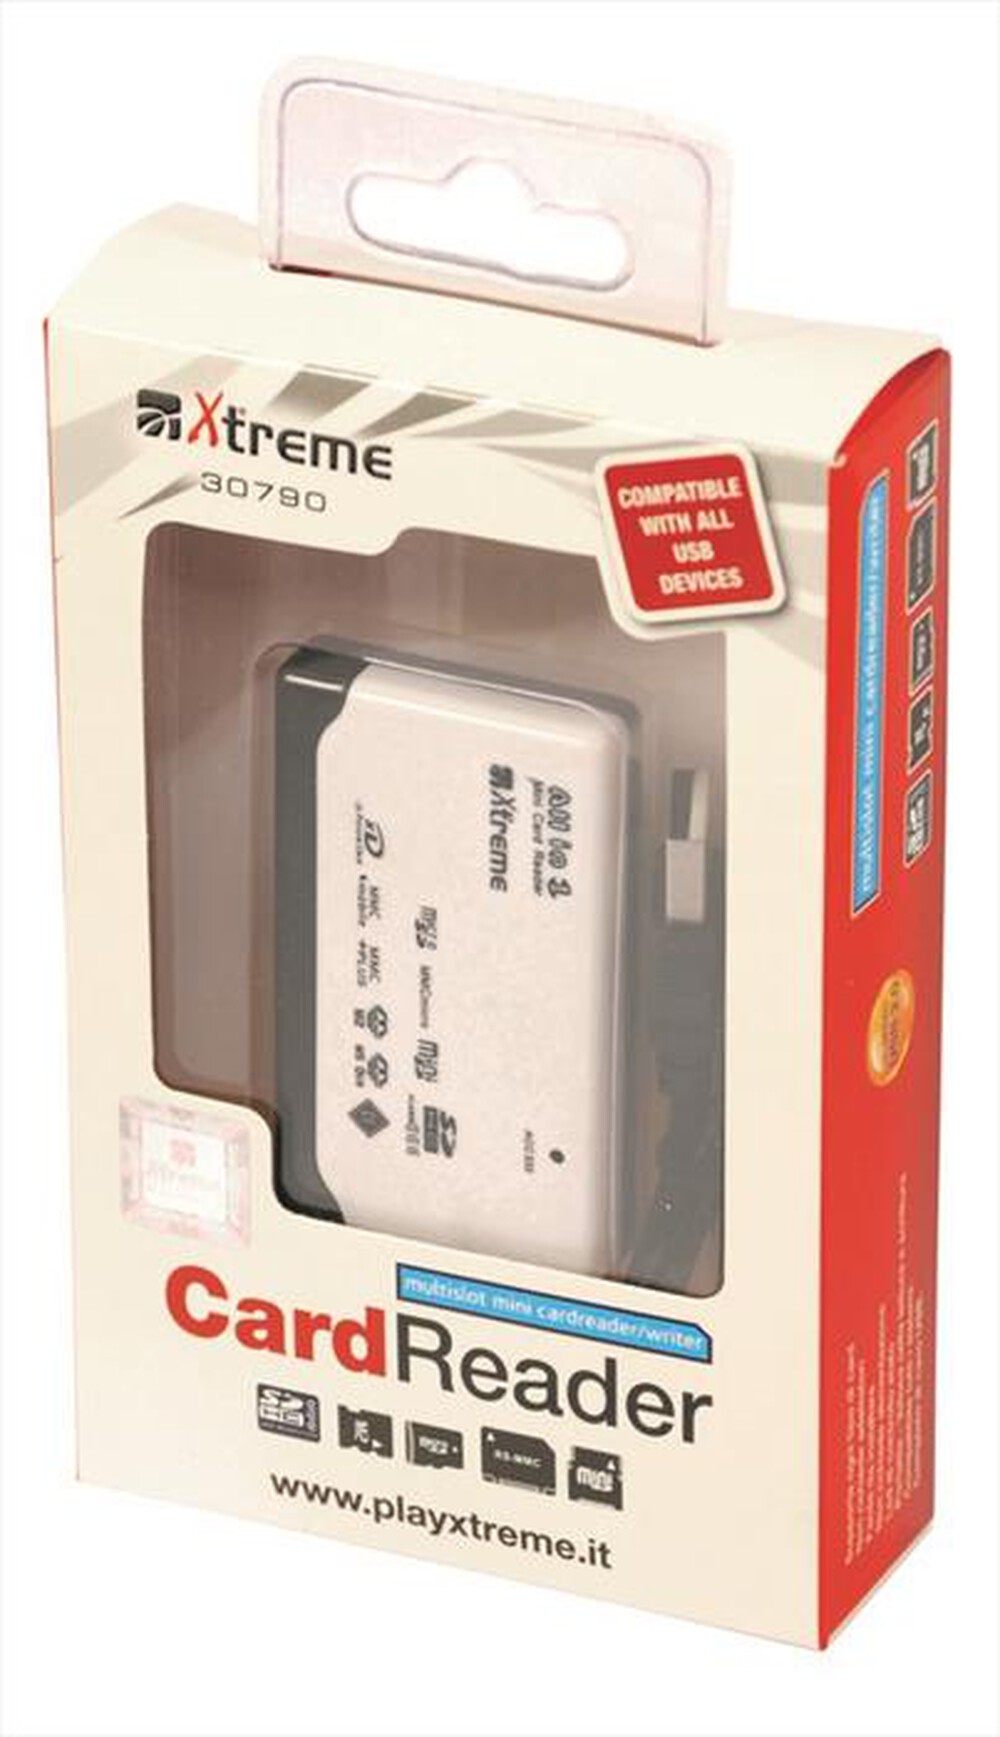 "XTREME - 30790 - All in 1 Mini Card Reader USB 2.0"